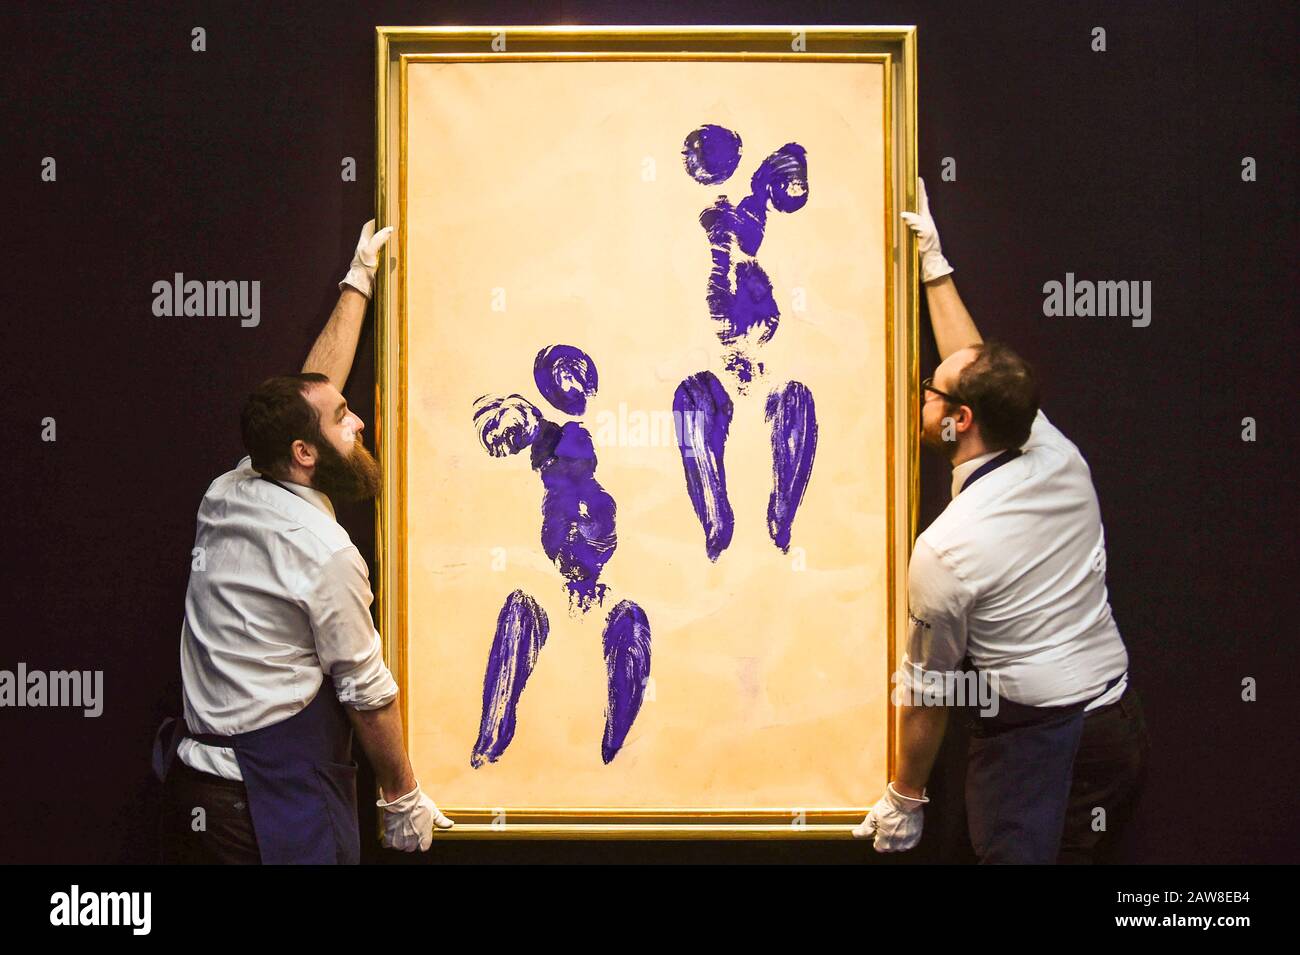 London, UK.  7 February 2020. Technicians present ''Untitled Anthropometry (Ant 132)'' by Yves Klein, (Est. £6,000,000 - 8,000,000). Preview of Sotheby's Contemporary Art Sale in their New Bond Street galleries.  Works by artists including Francis Bacon, Yves Klein, Jean-Michel Basquiat and David Hockney will be offered for auction on 11 February 2020. Credit: Stephen Chung / Alamy Live News Stock Photo